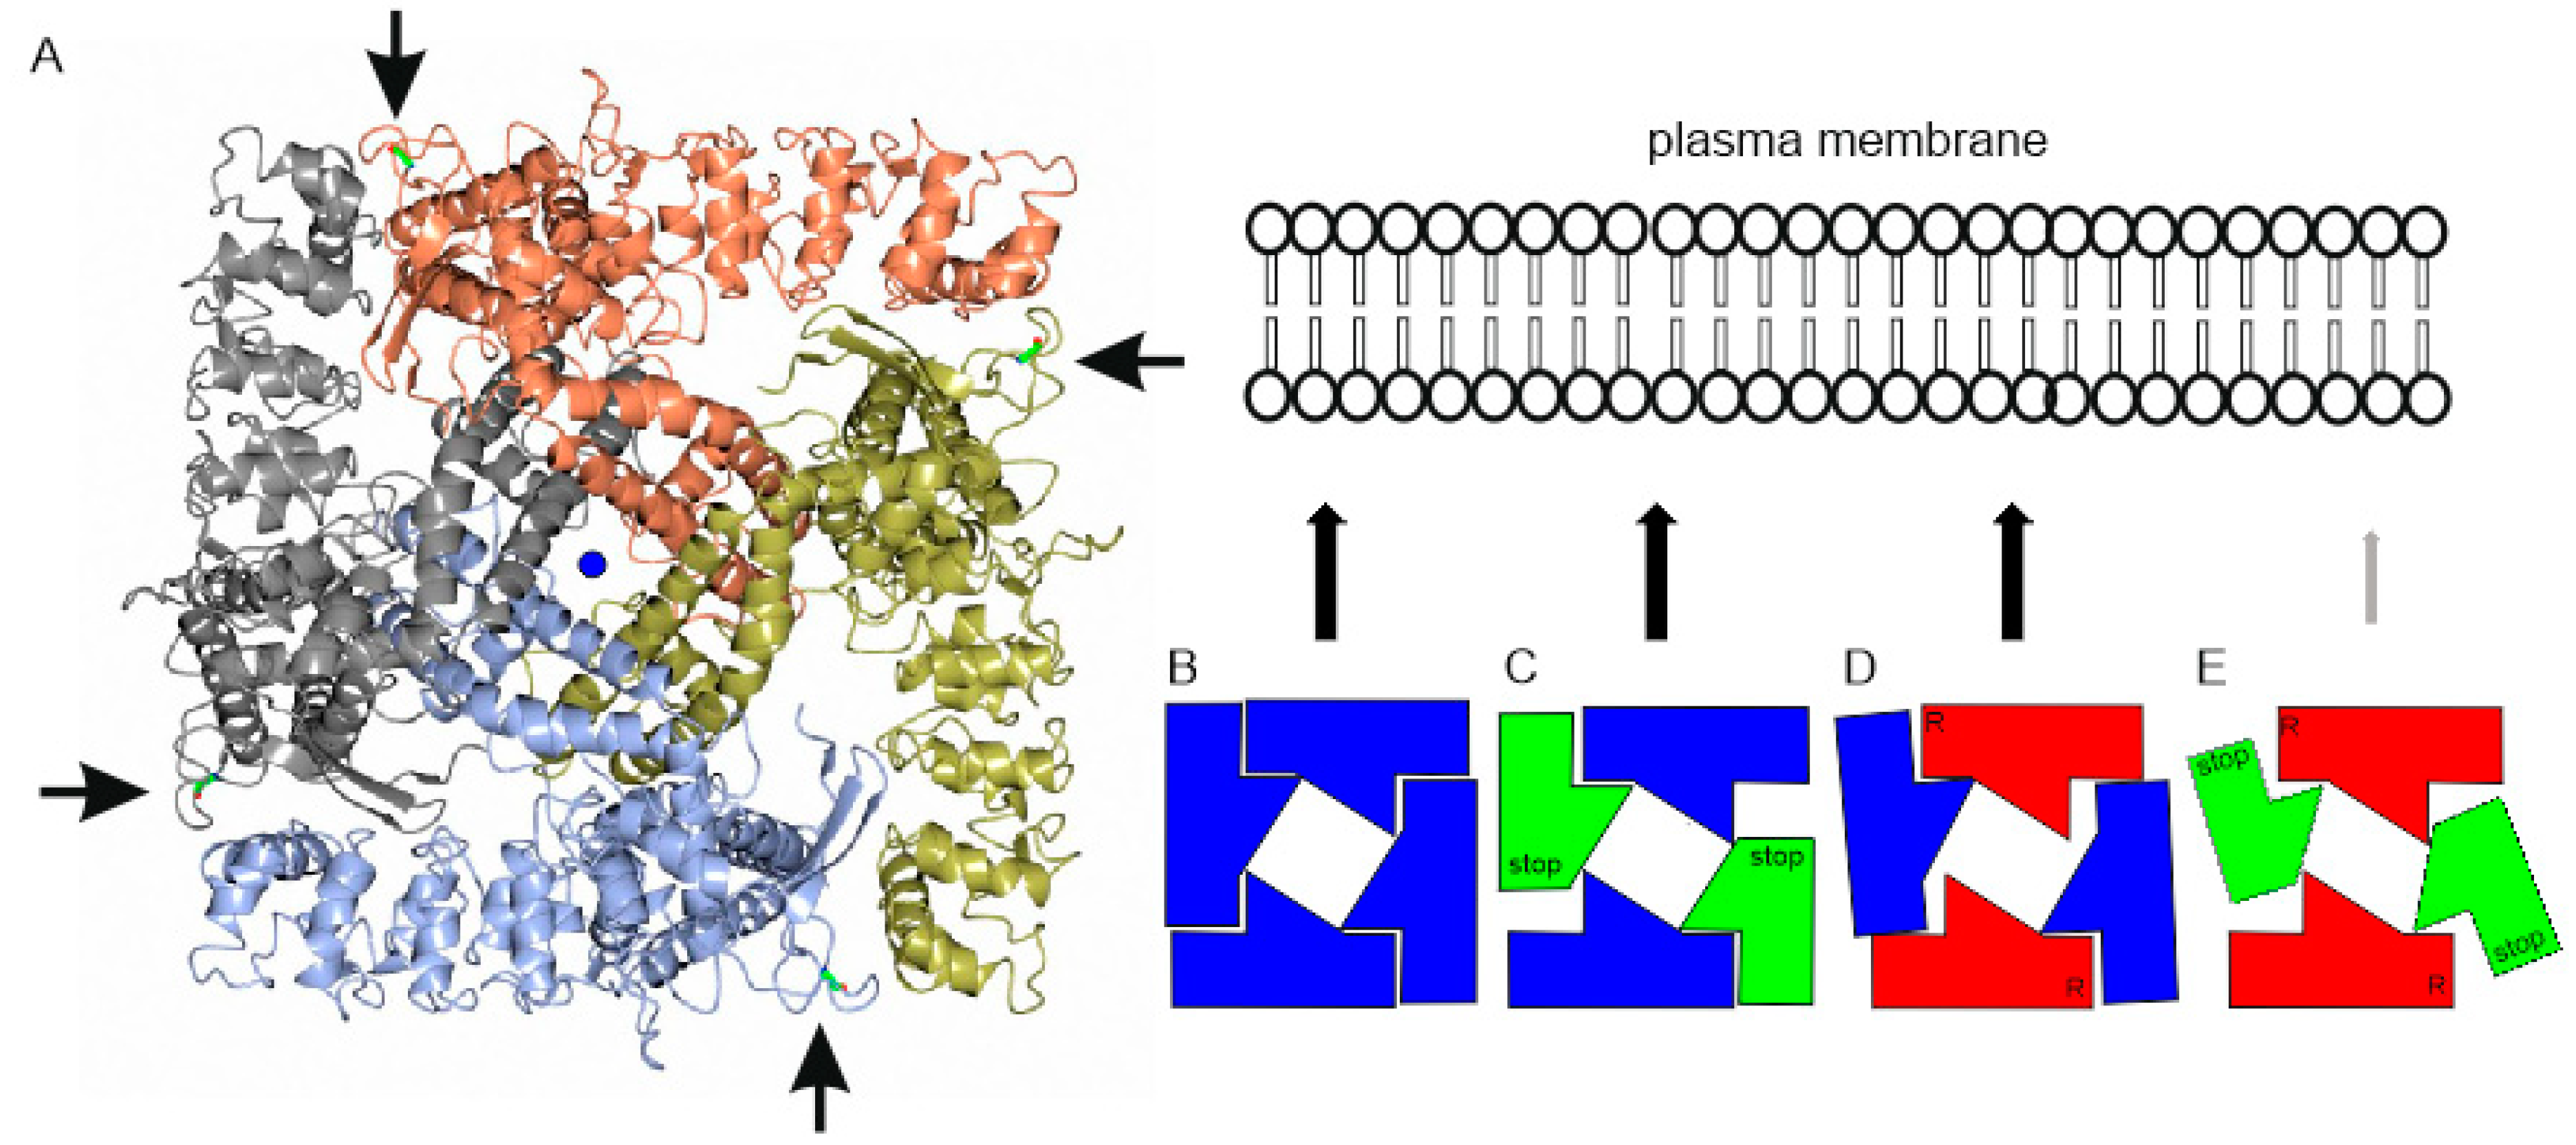 IJMS | Free Full-Text | Mutations That Affect the Surface Expression of  TRPV6 Are Associated with the Upregulation of Serine Proteases in the  Placenta of an Infant | HTML